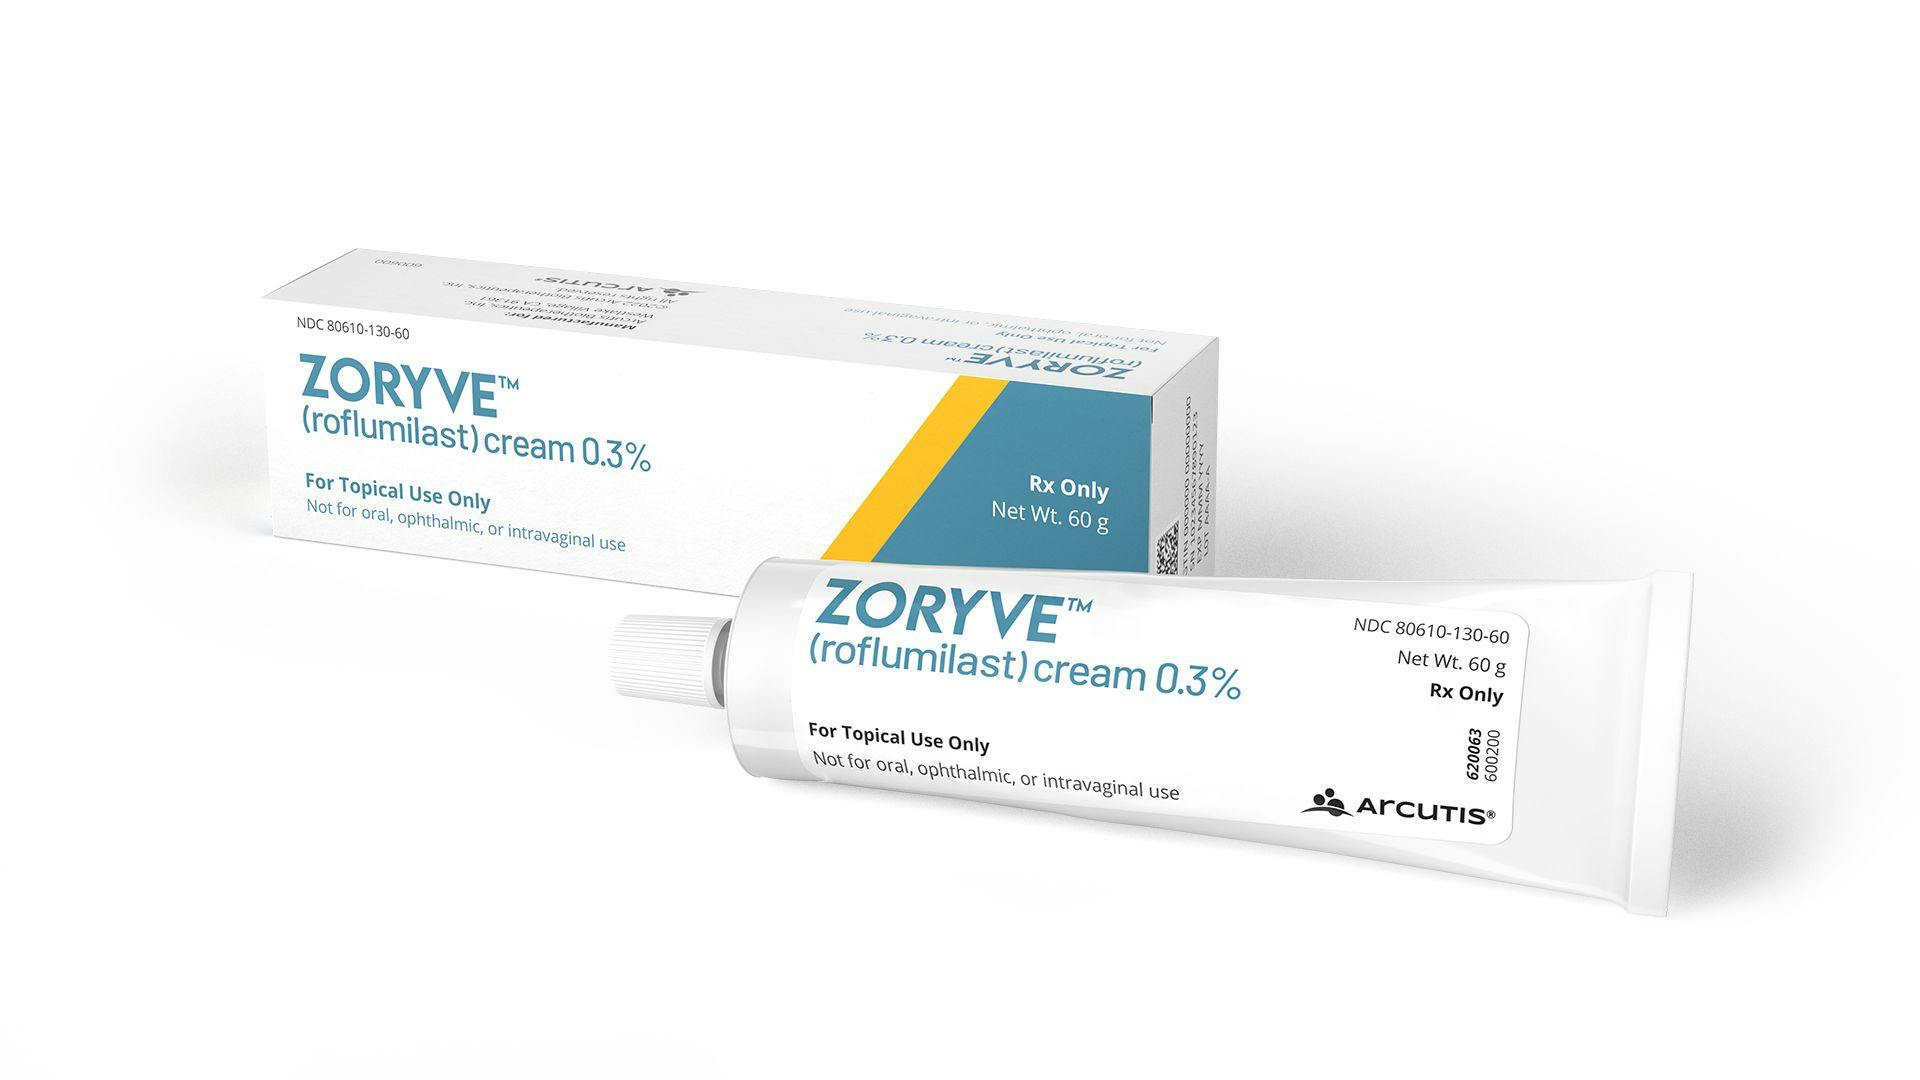 Arcutis Launches Steroid-Free Psoriasis Therapy Zoryve